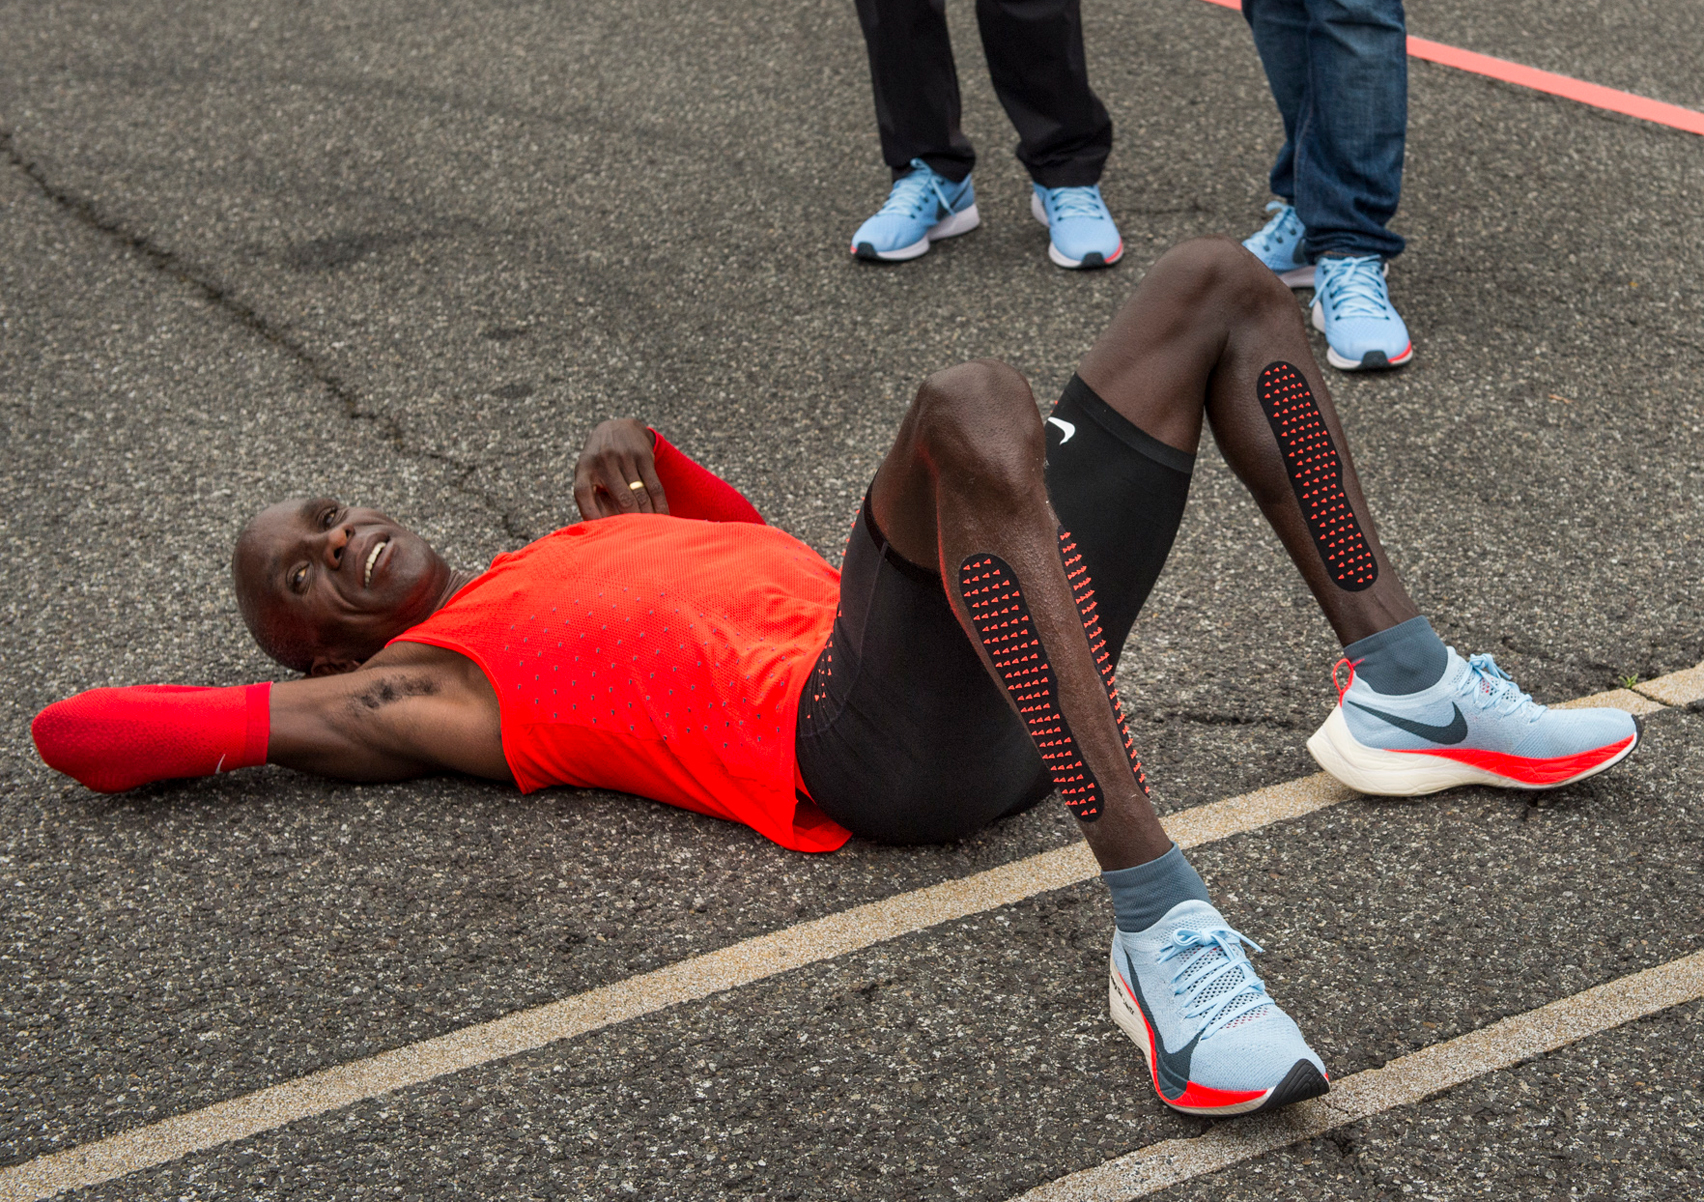 Athletes custom-engineered Nike trainers in attempt to marathon barrier